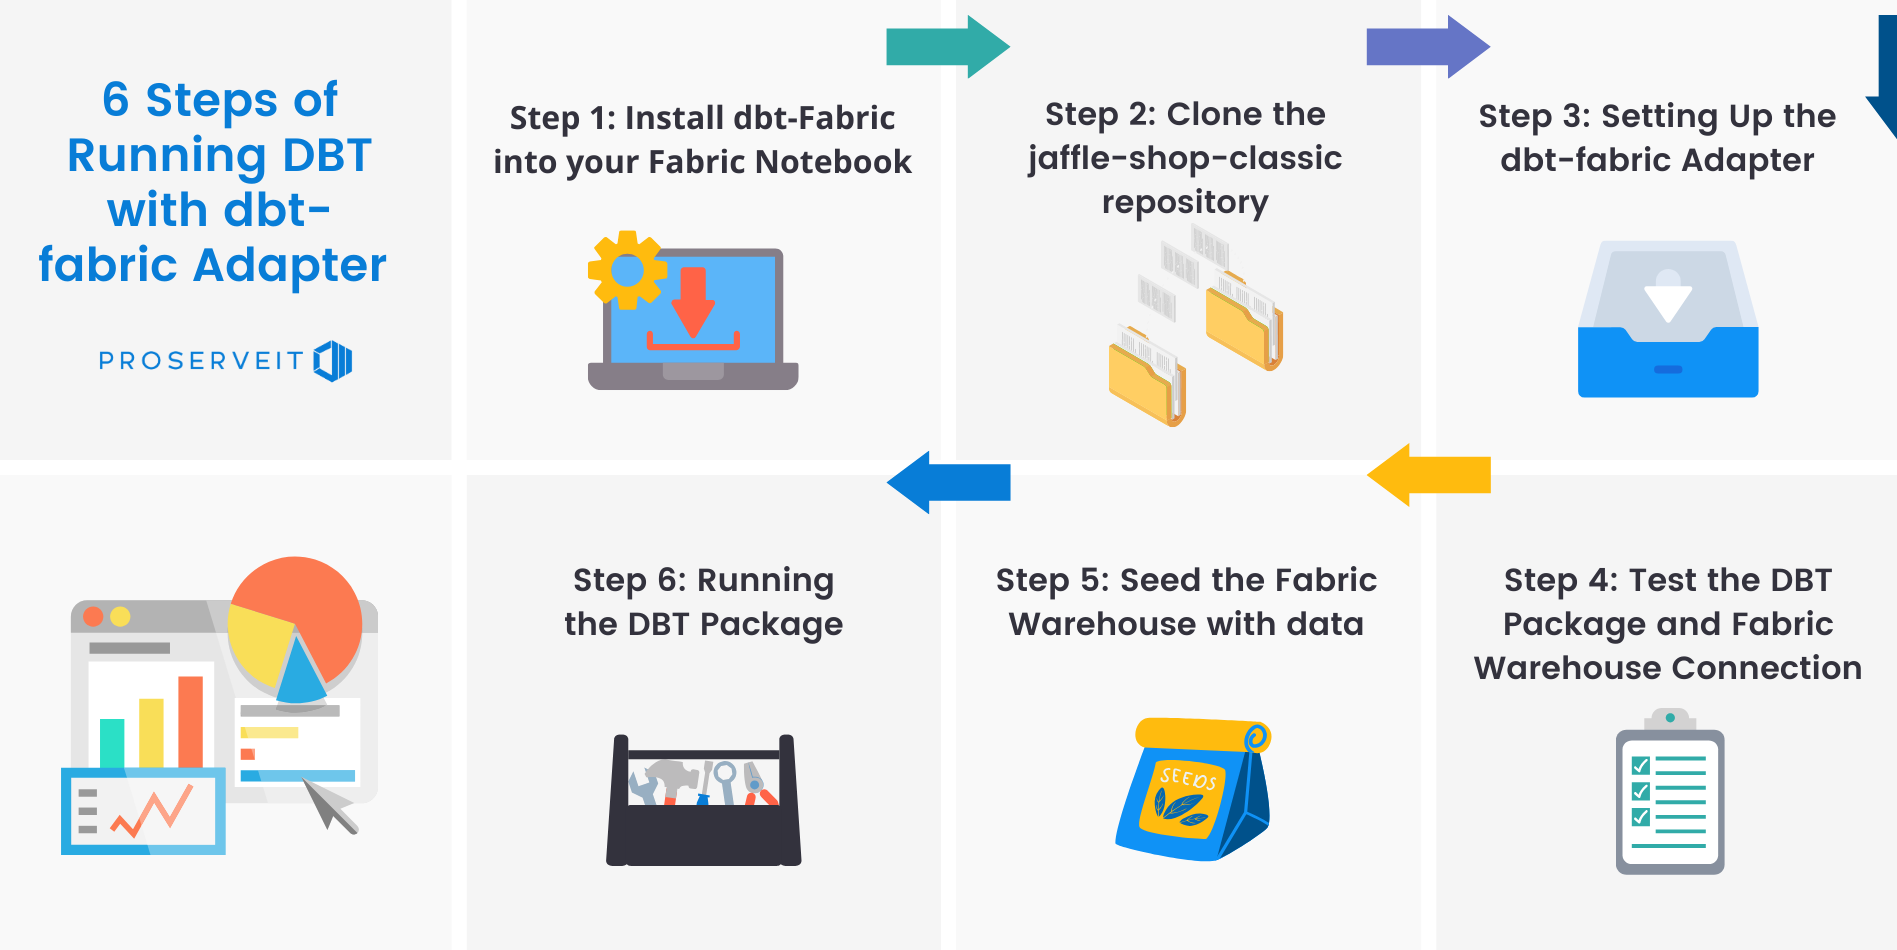 infographic-6 Steps of Running DBT with dbt-fabric Adapter